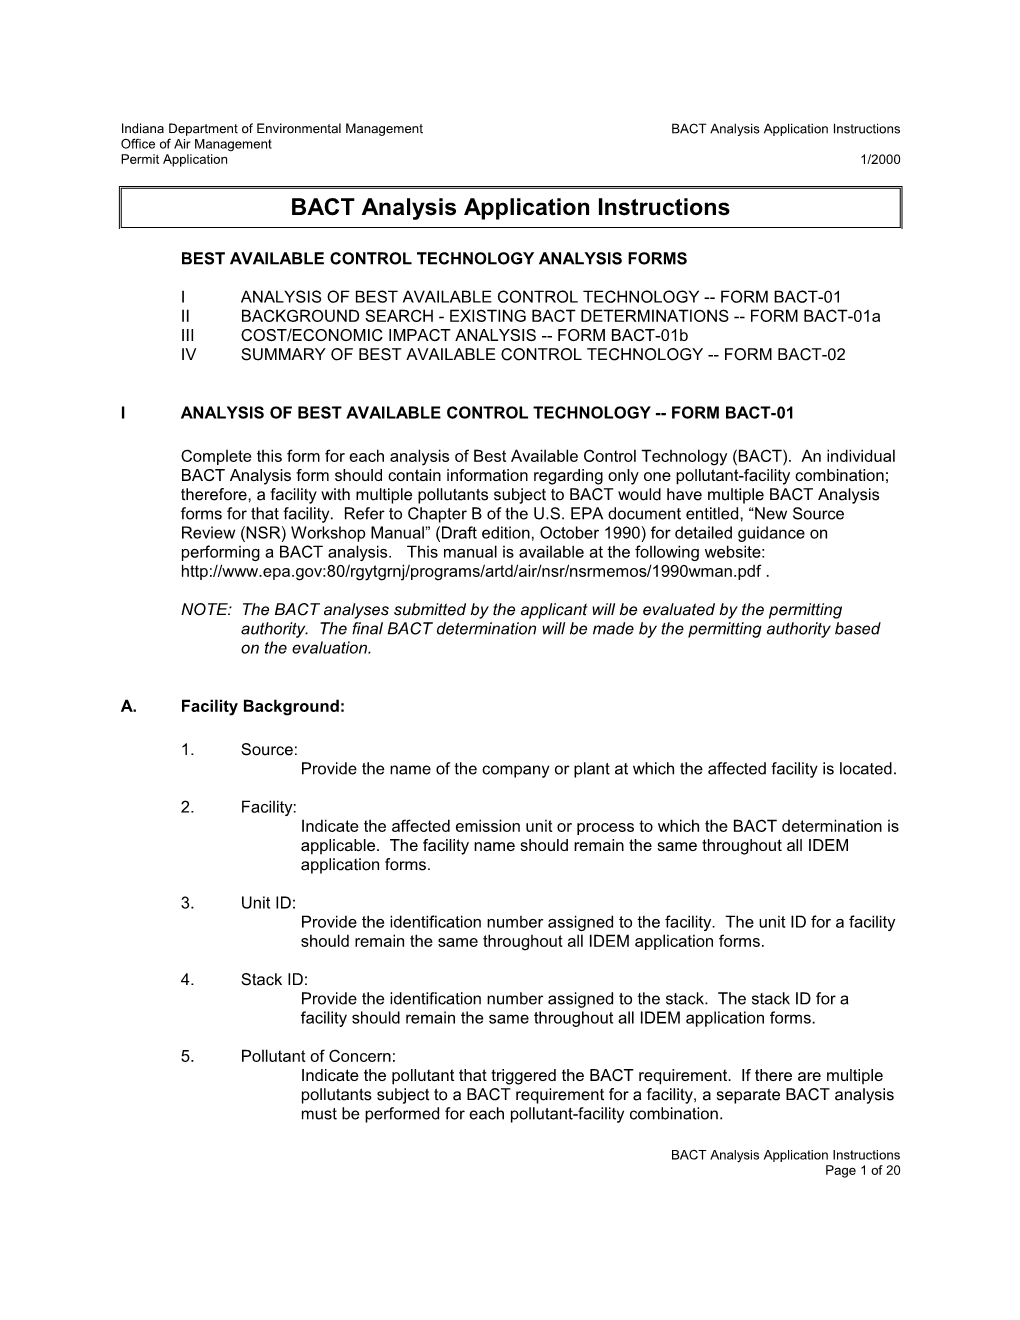 BACT Analysis Application Instructions